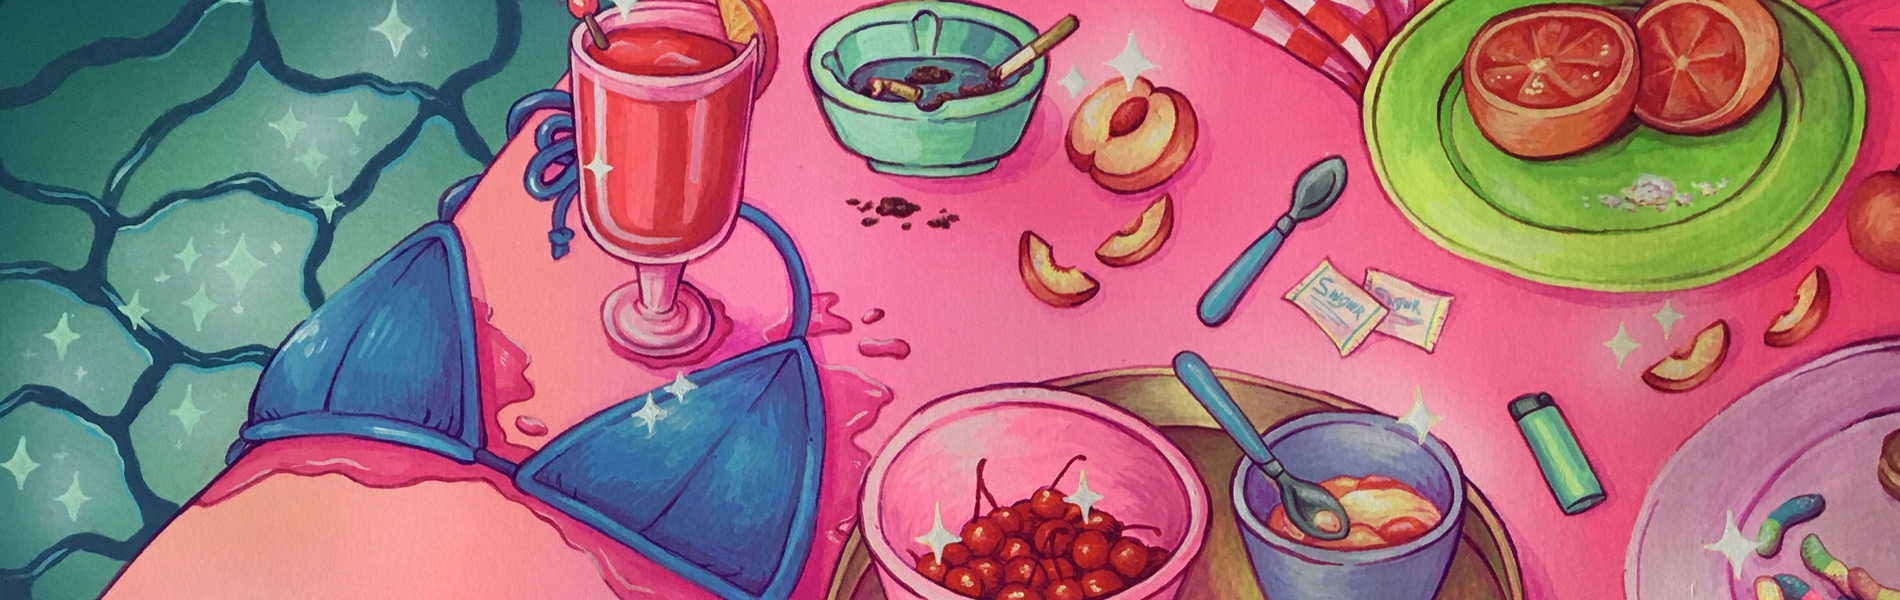 Detail of a painting in bright colors of poolside items, a bikini top, beverages, fruit